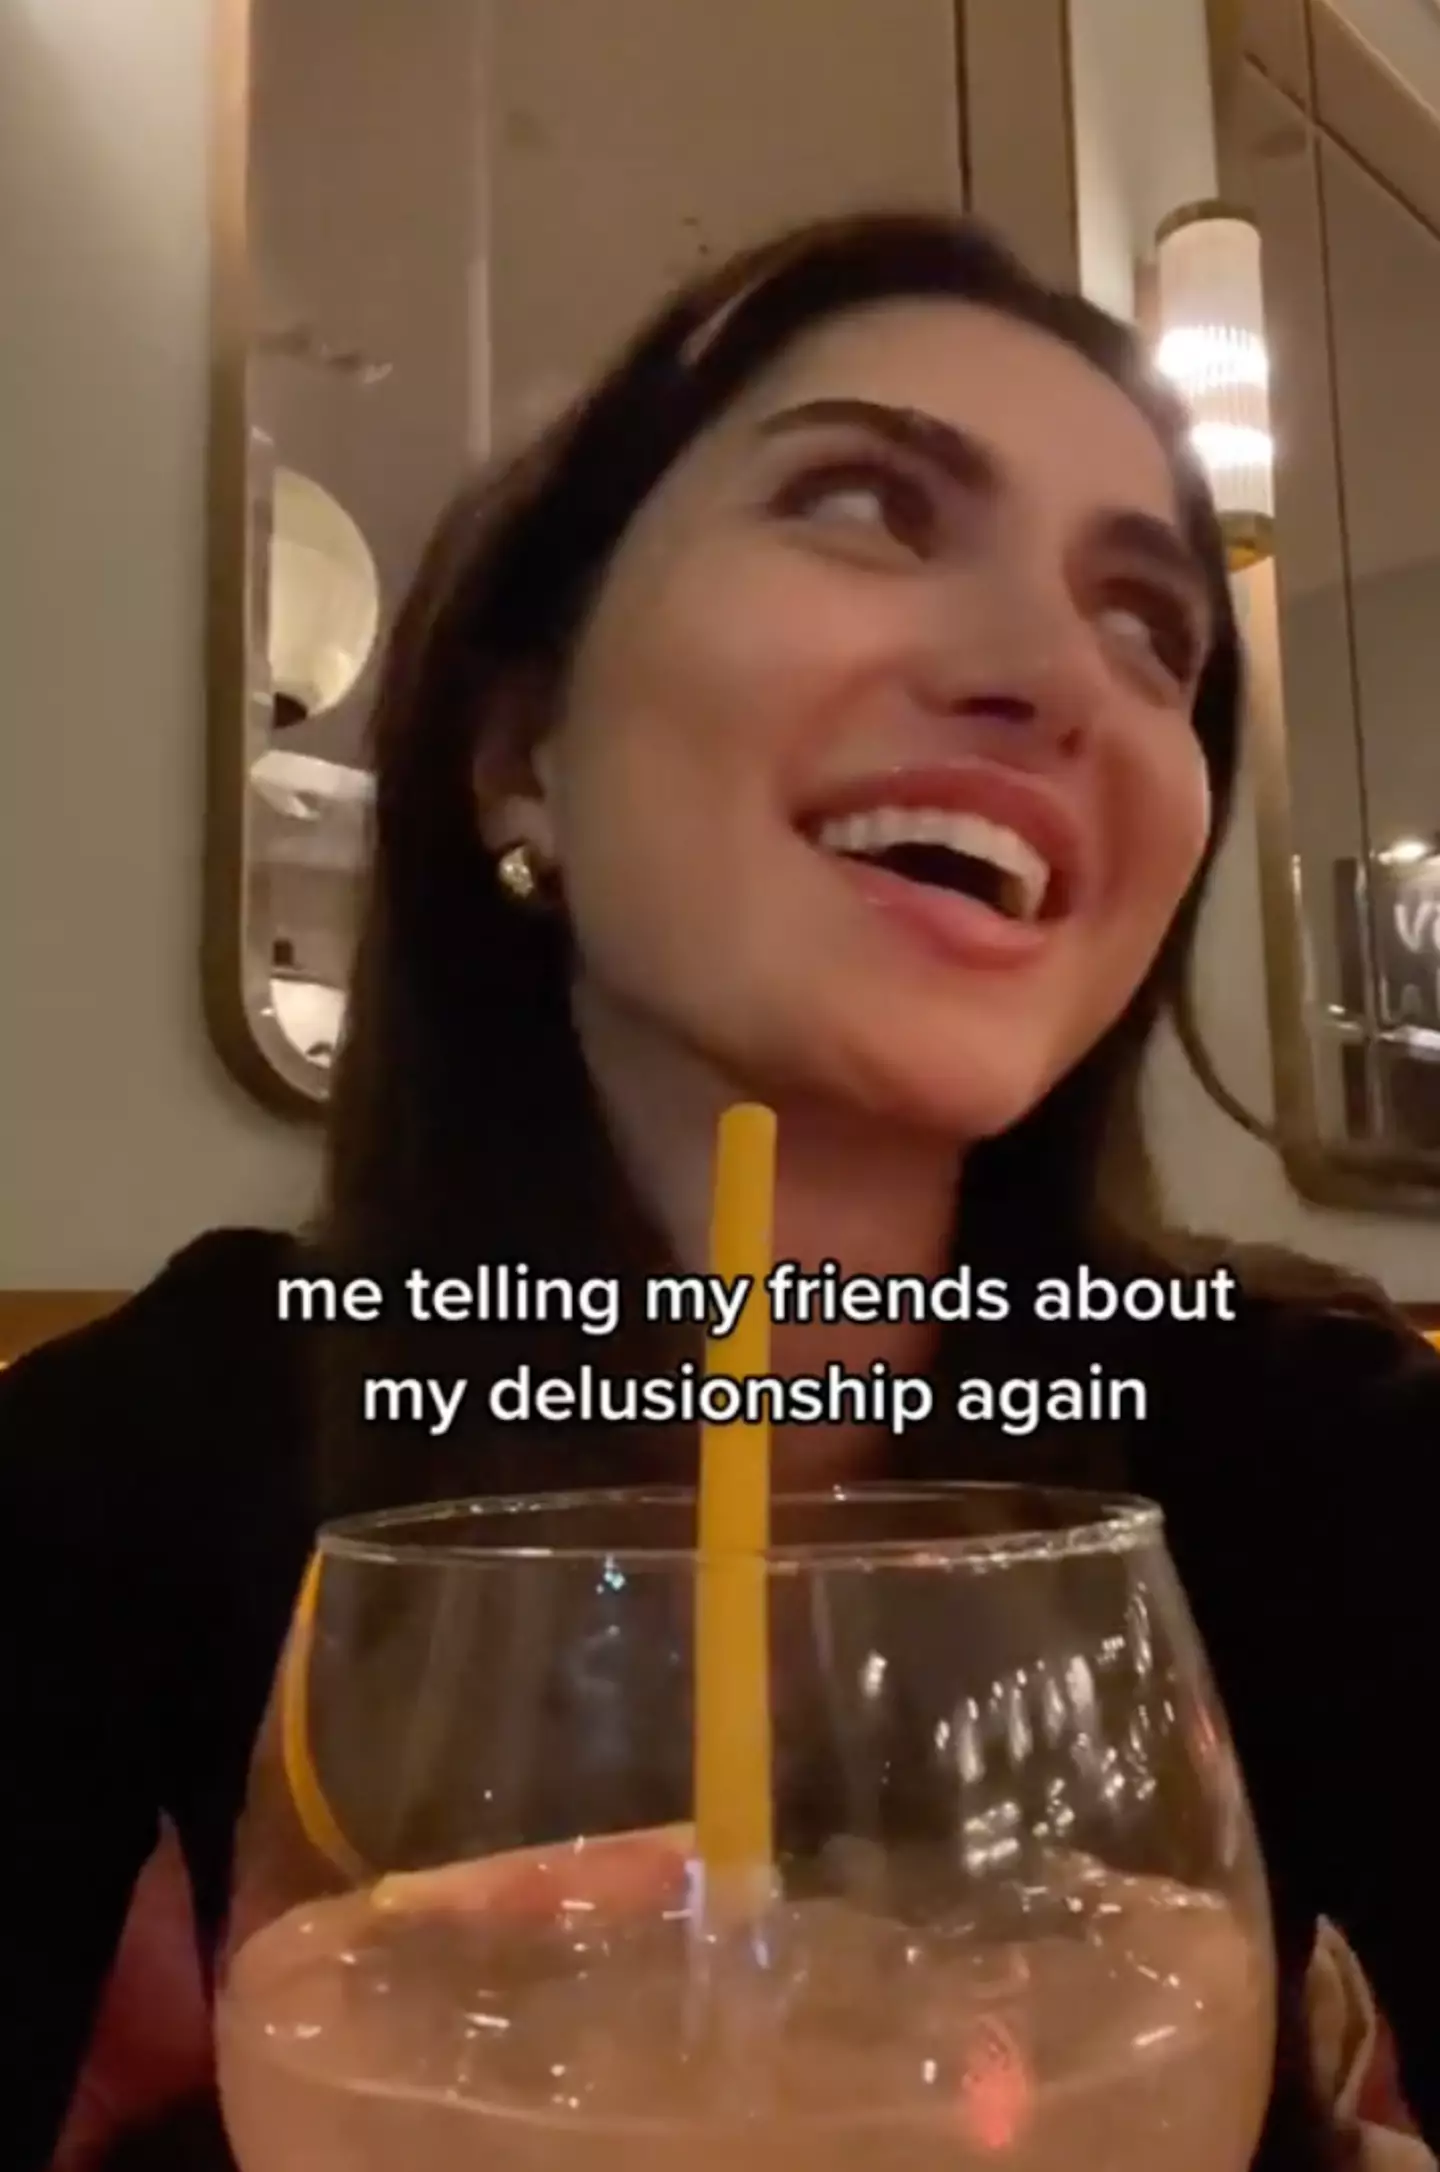 Women are flocking to TikTok to share their experiences with a 'delusionship'.